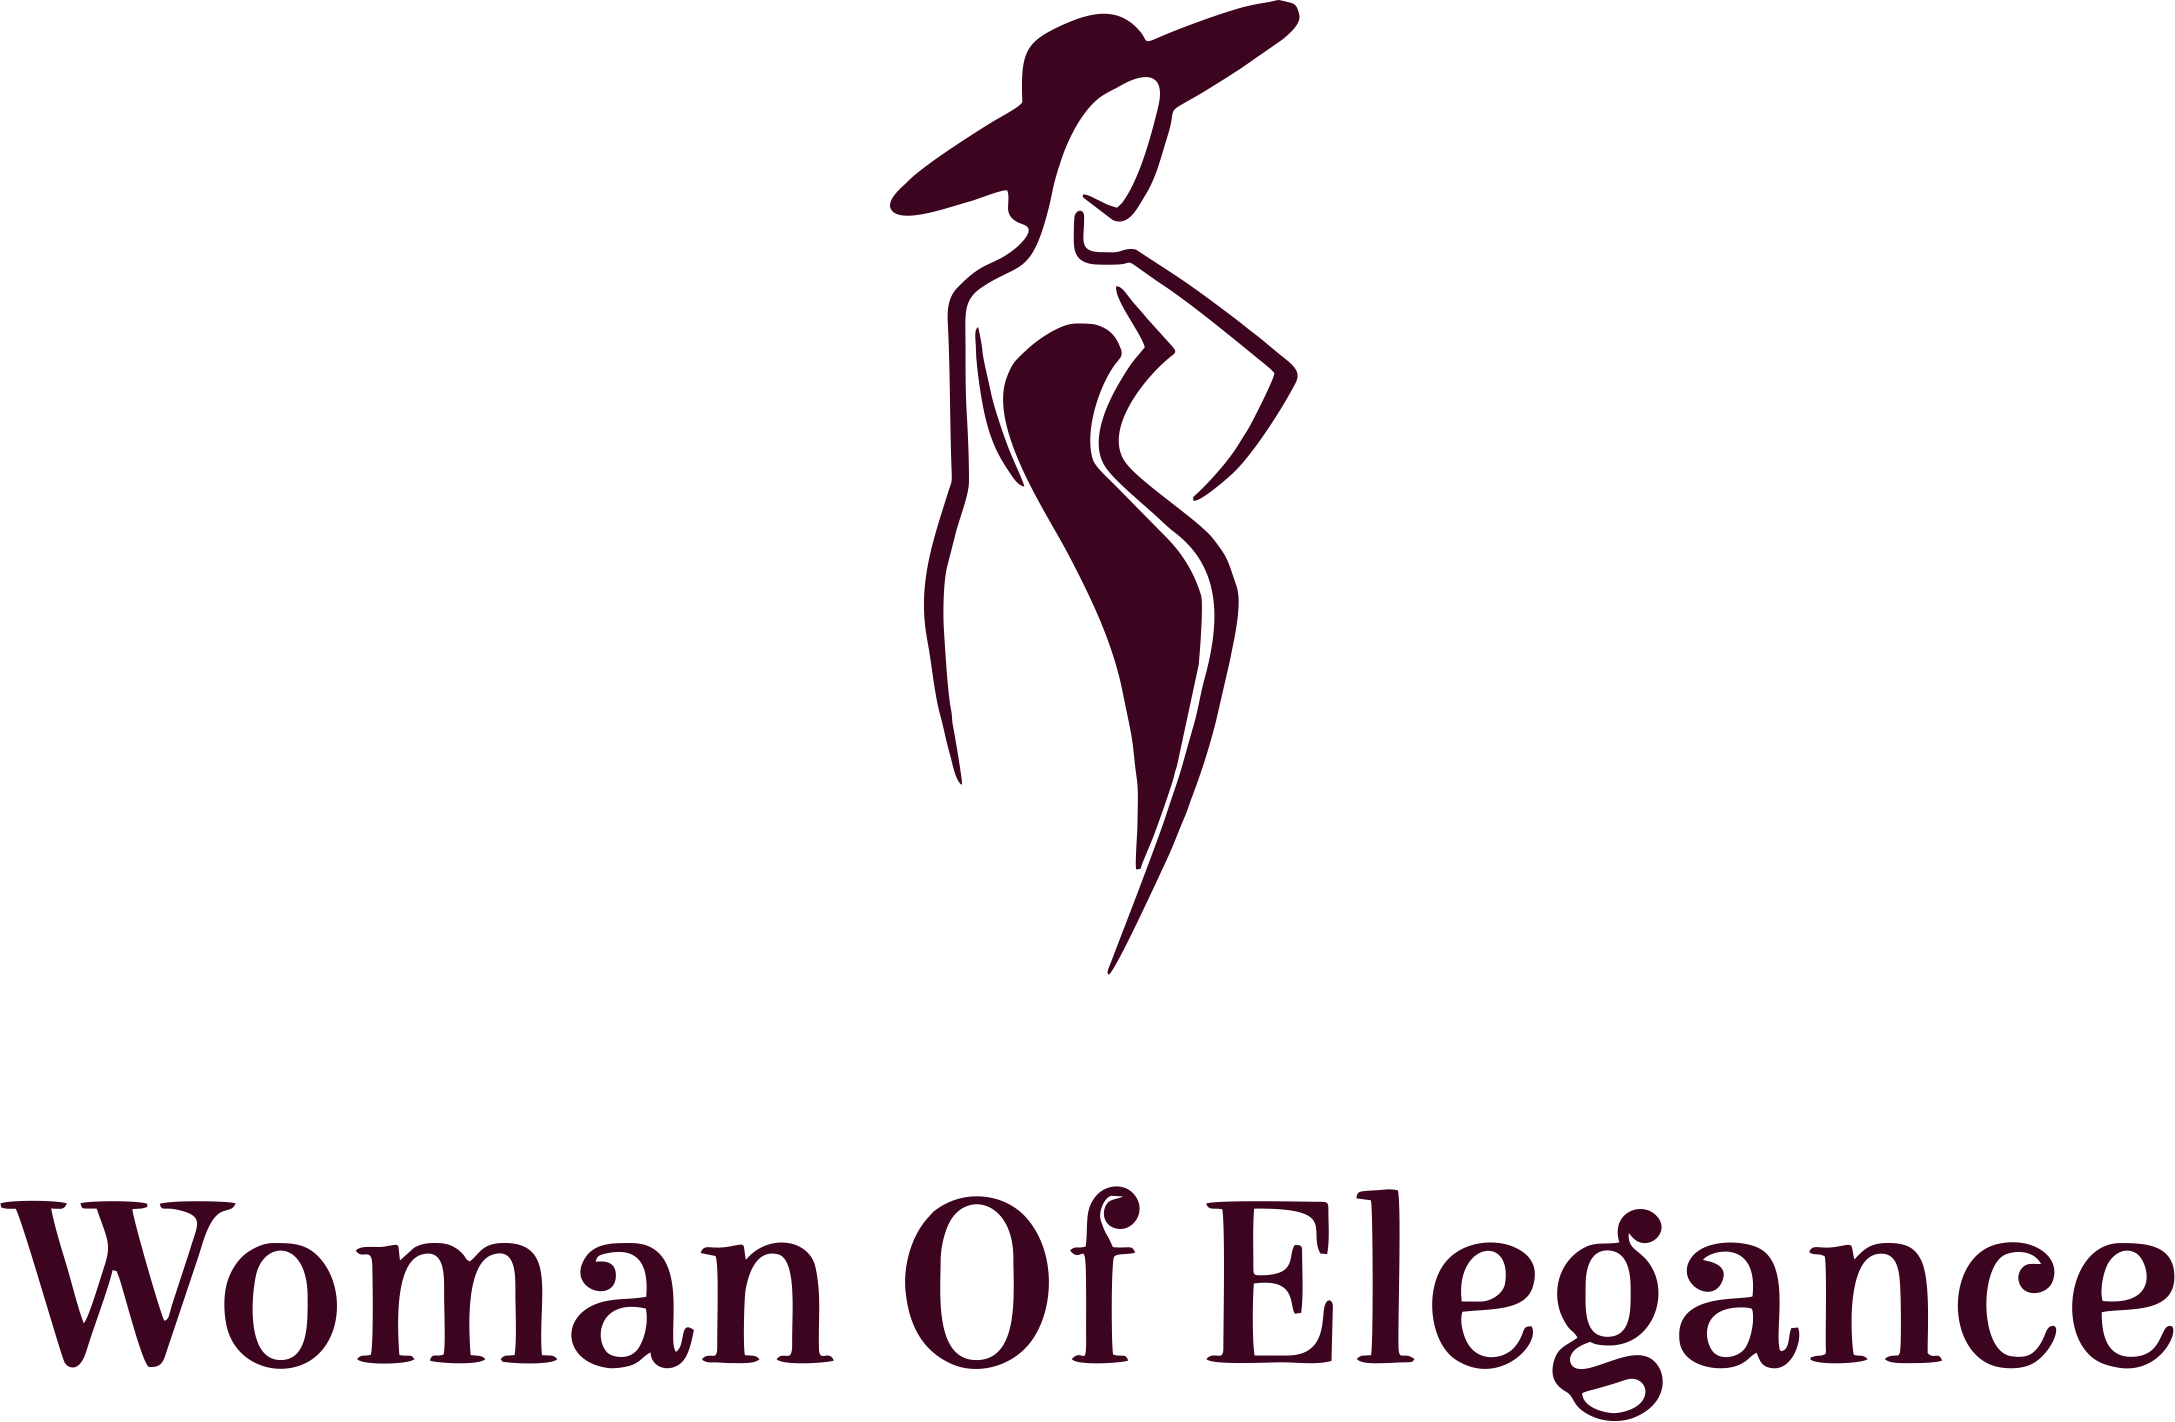 Become the Epitome of Elegance